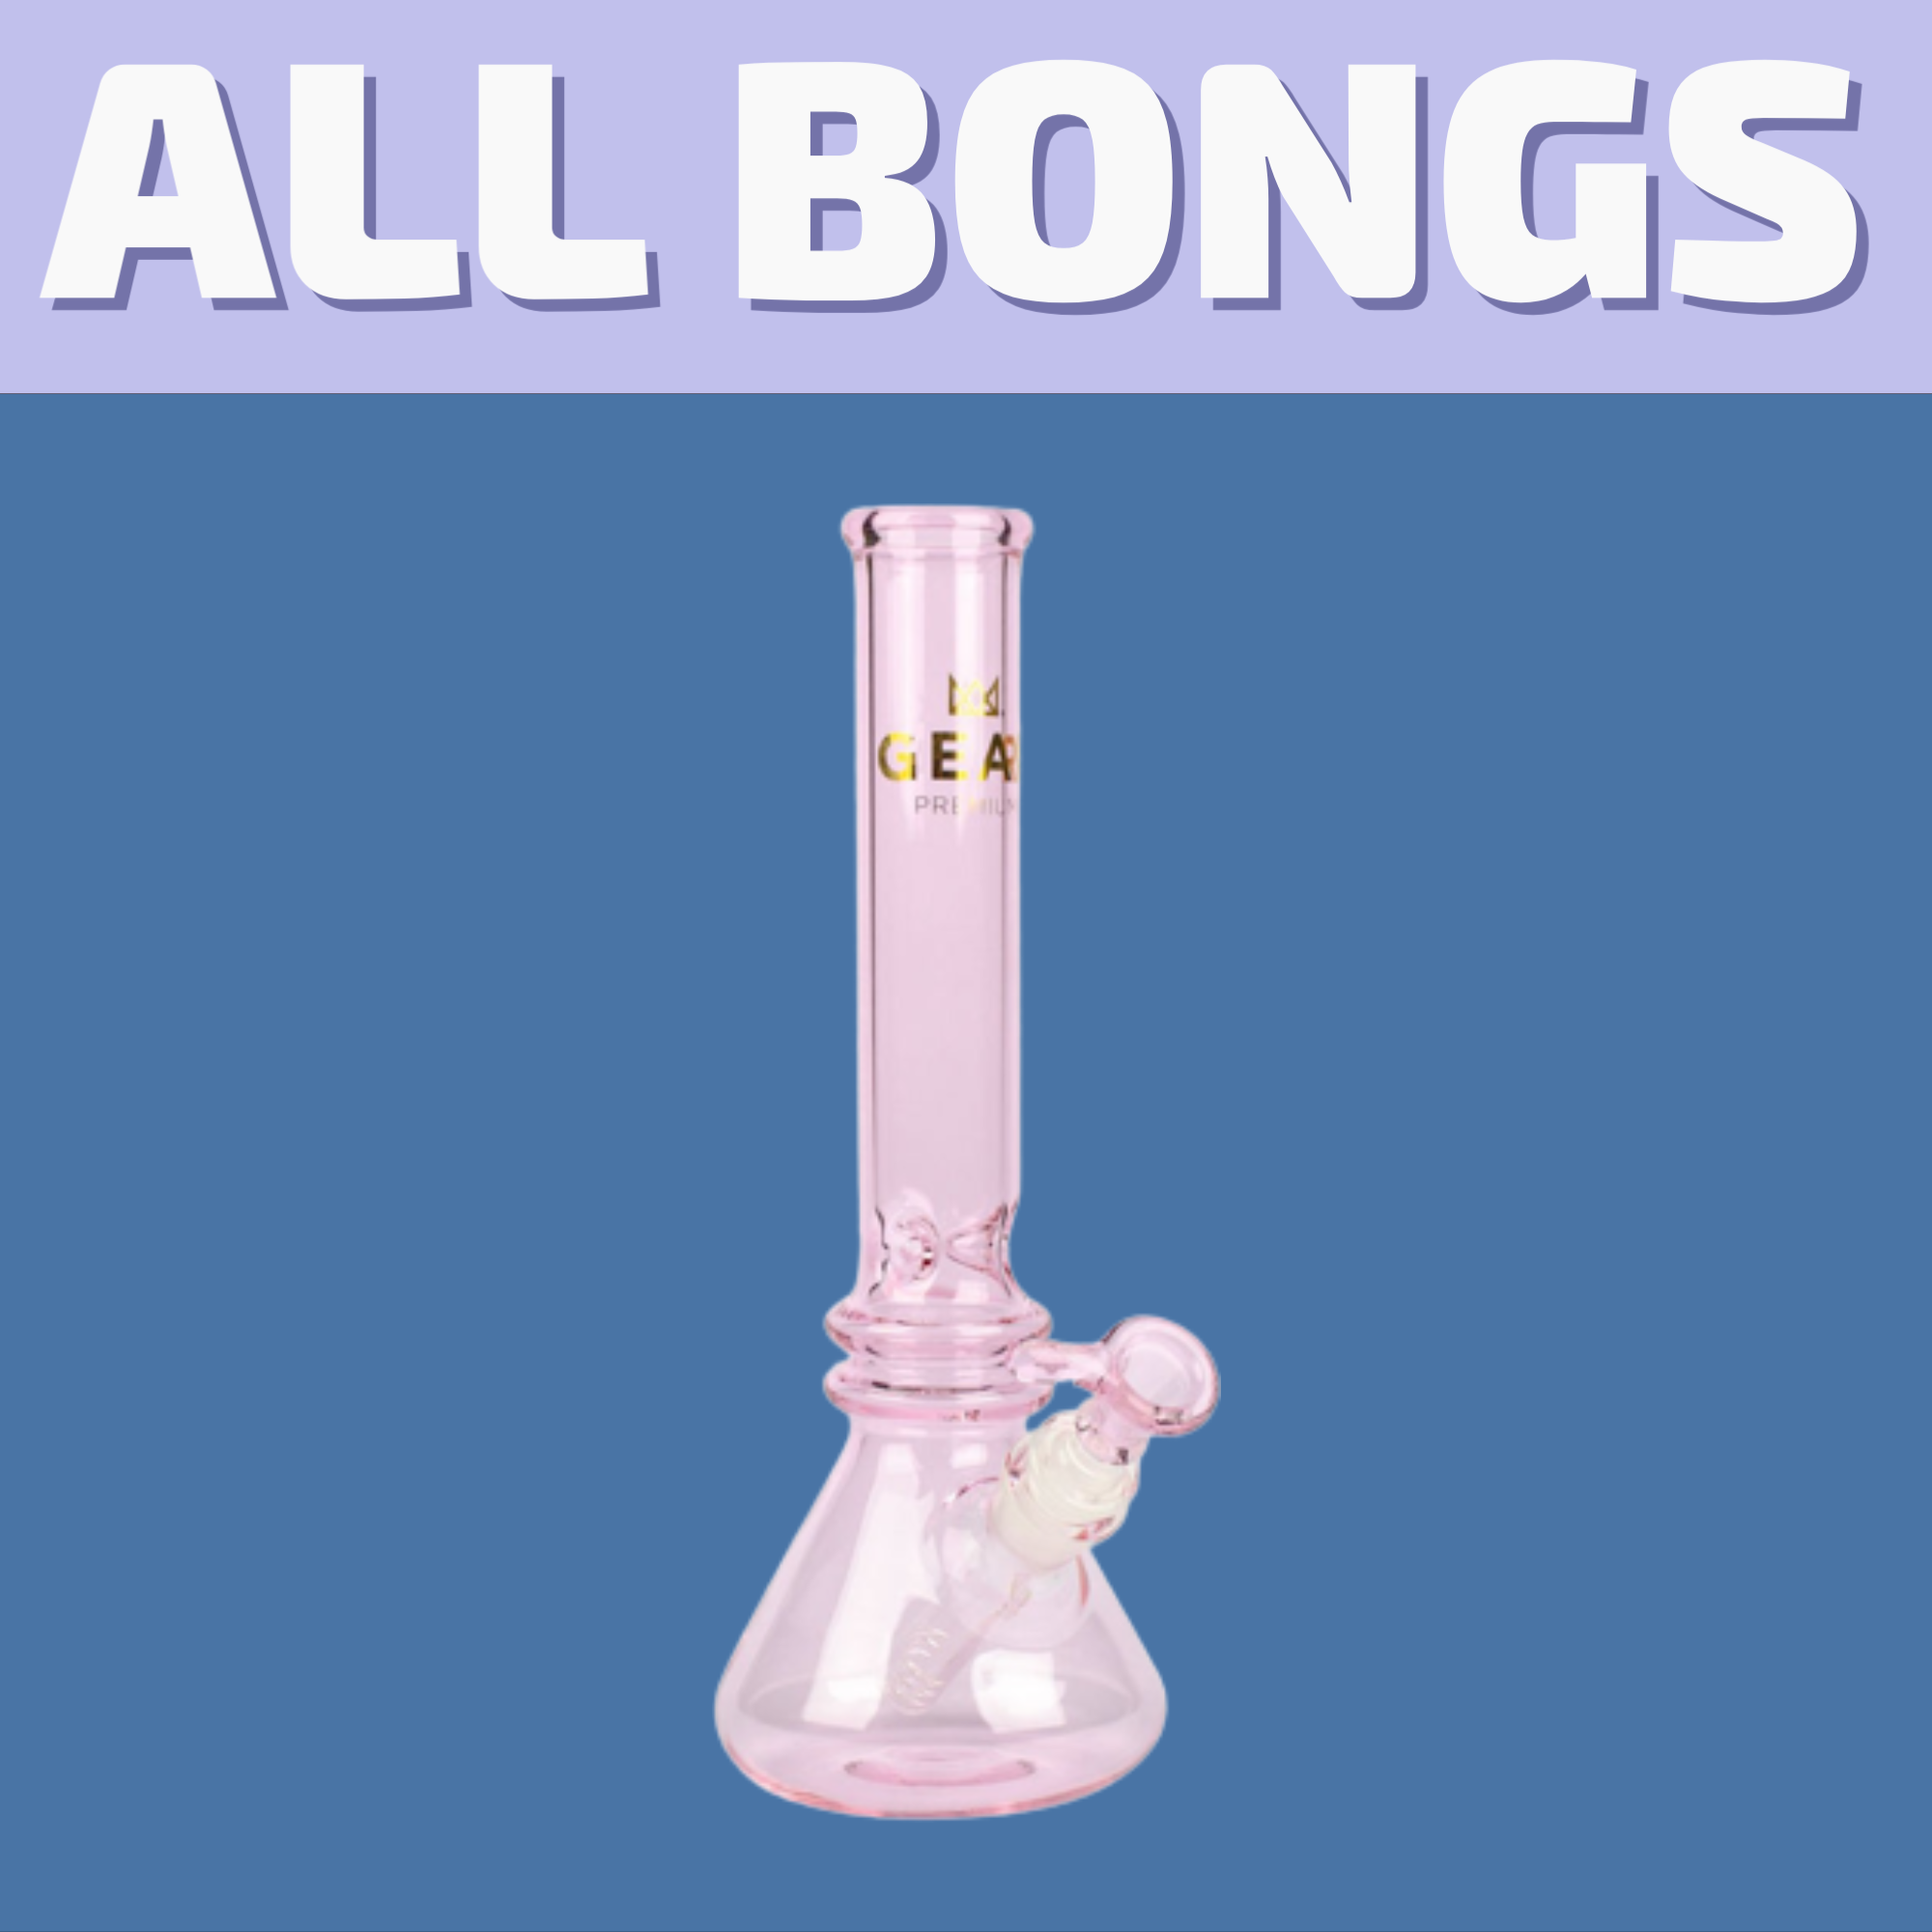 Shop Winnipeg's best selection of bongs, water pipes cannabis products, and edibles for same day delivery or buy them in-store.